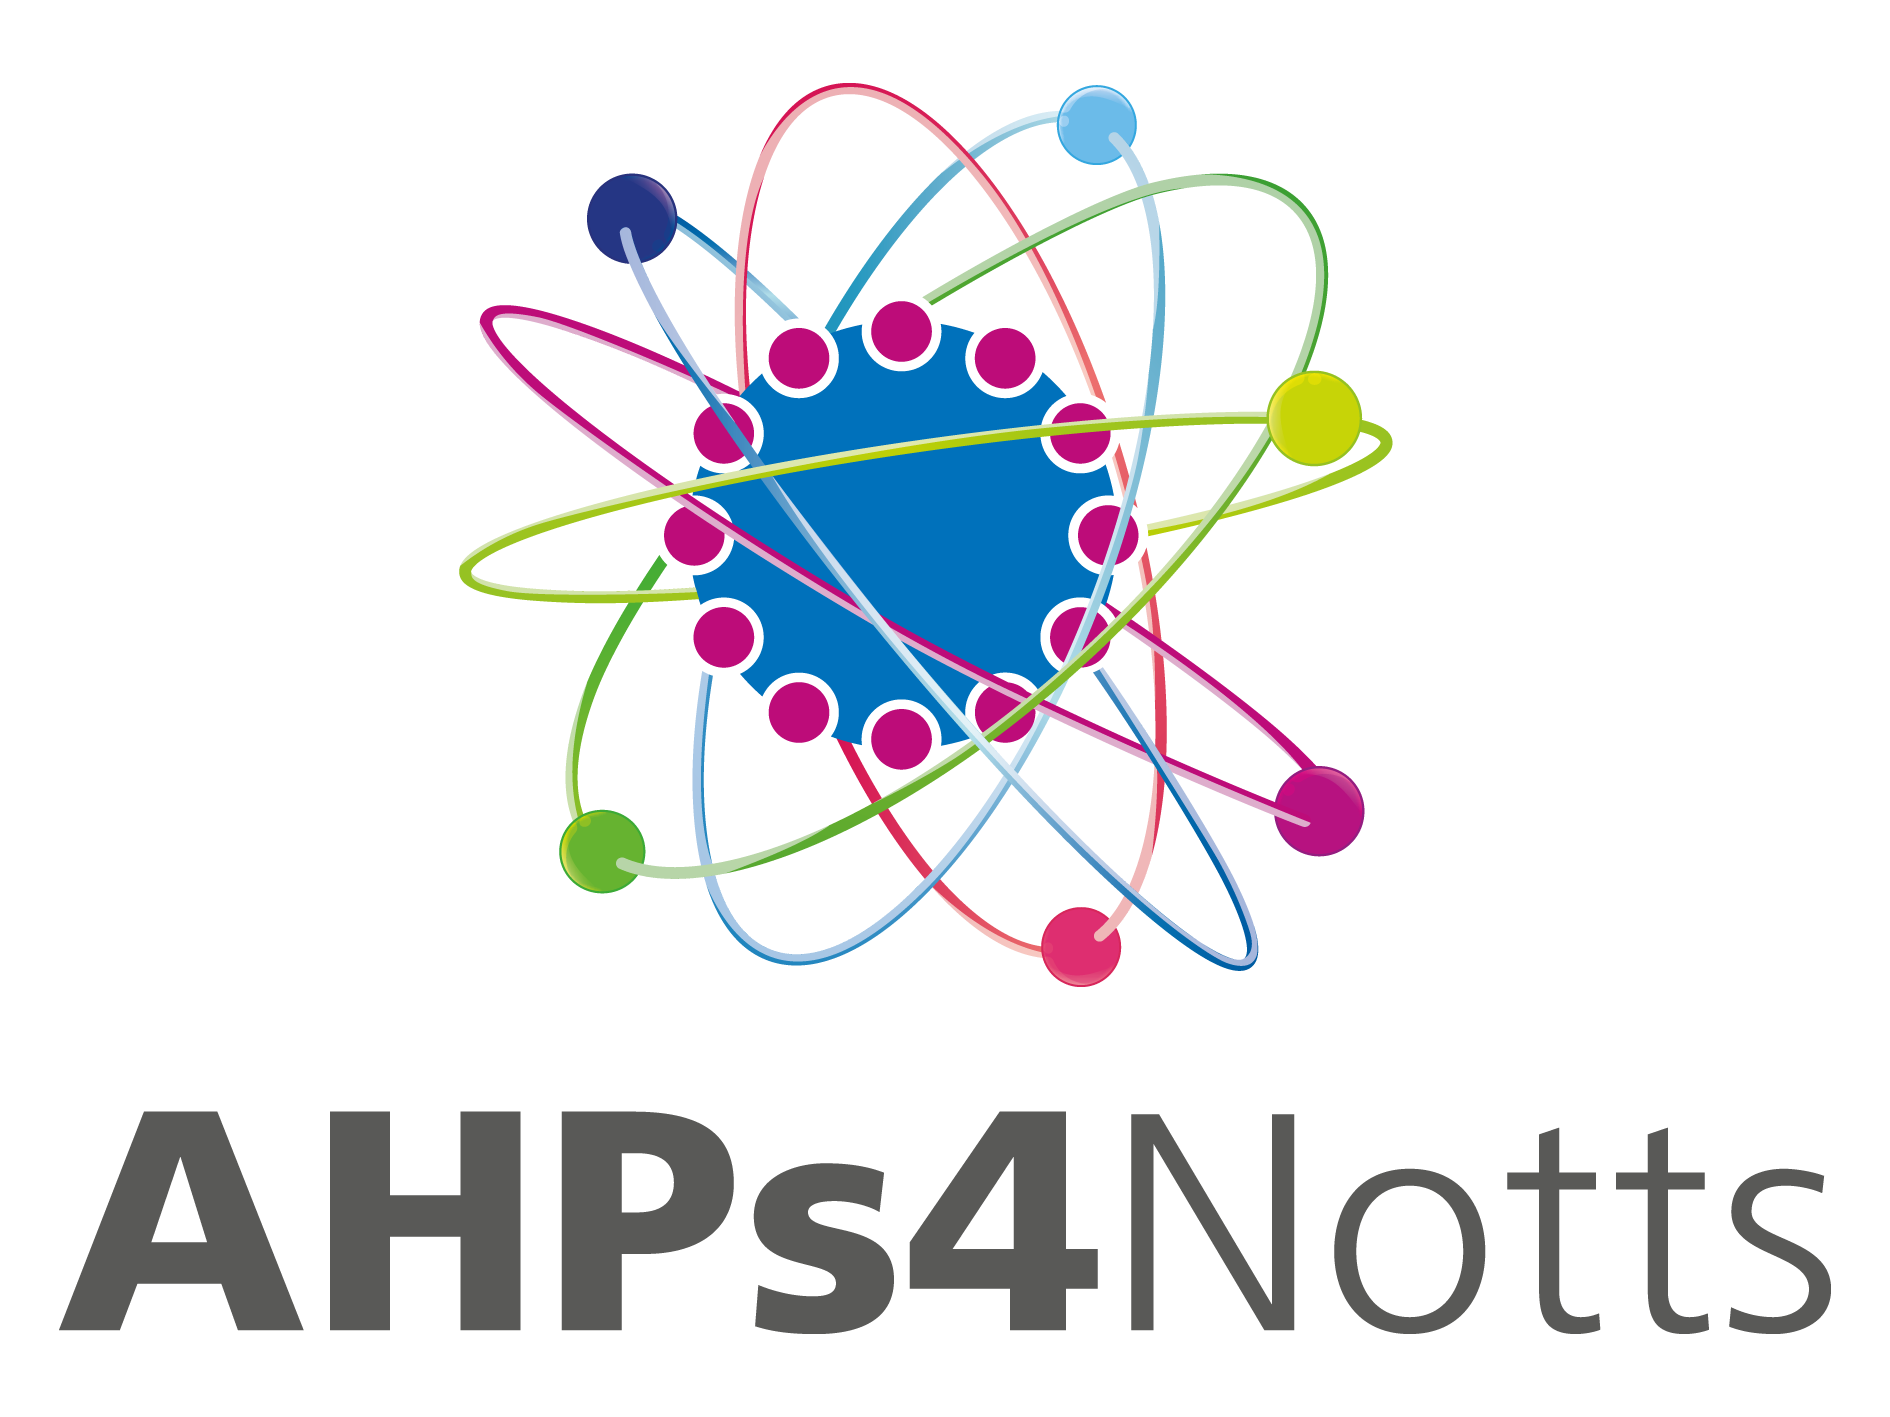 AHPs4Notts Logo - atoms circling round a sphere